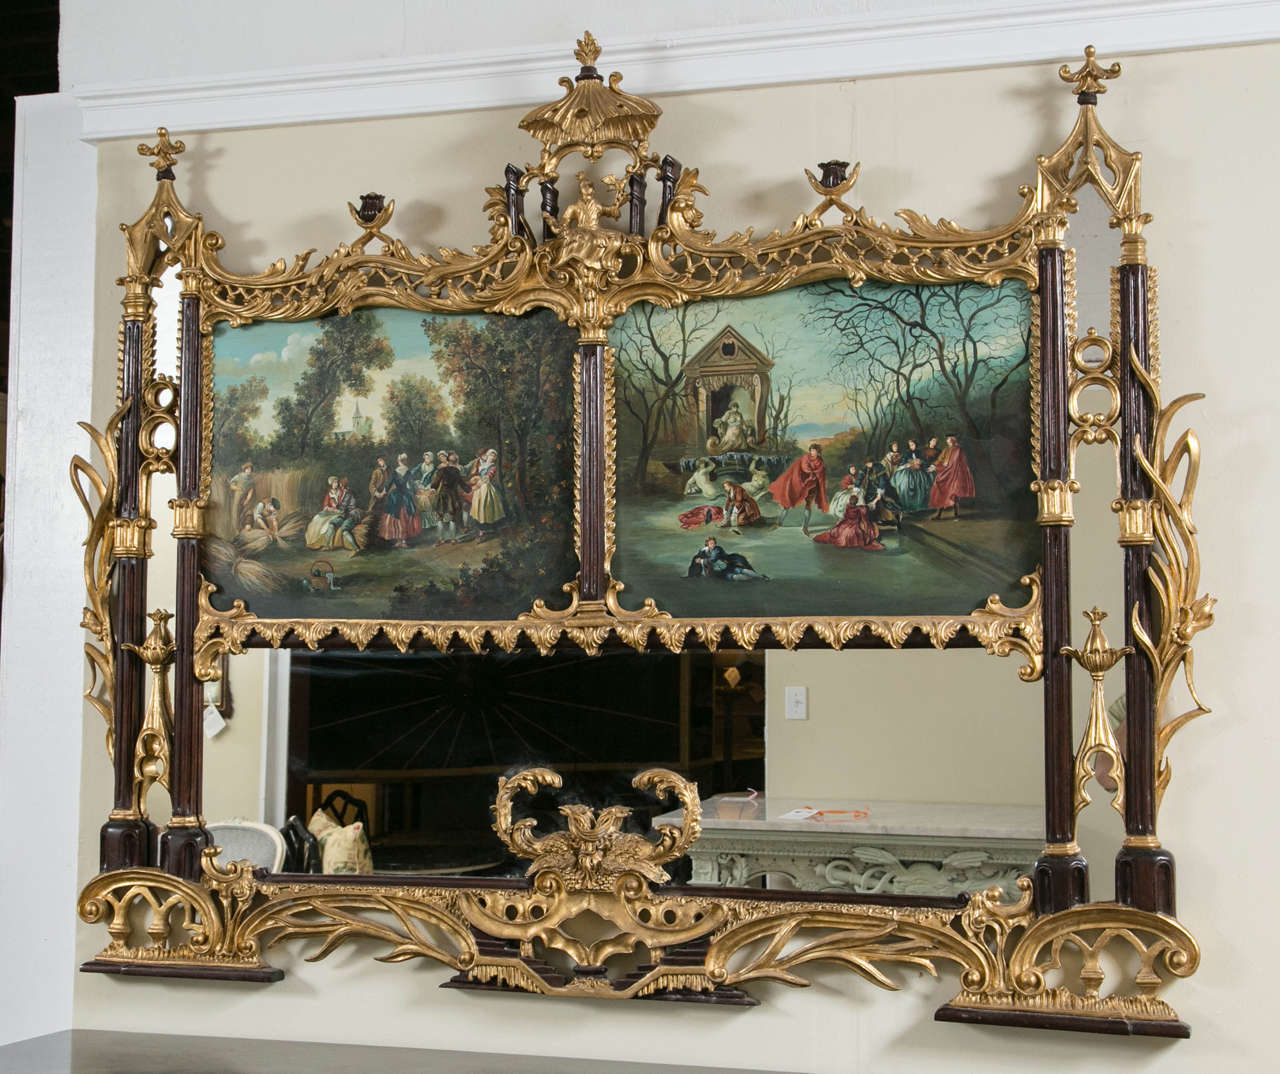 Pair of palatial Chinese Chippendale style mirrors. A spectacular example of the use of Chinoiserie in 18th century Chippendale design. With ebonized and antique gold leaf that adds beauty in every aspect. These monumental mirrors would make a one